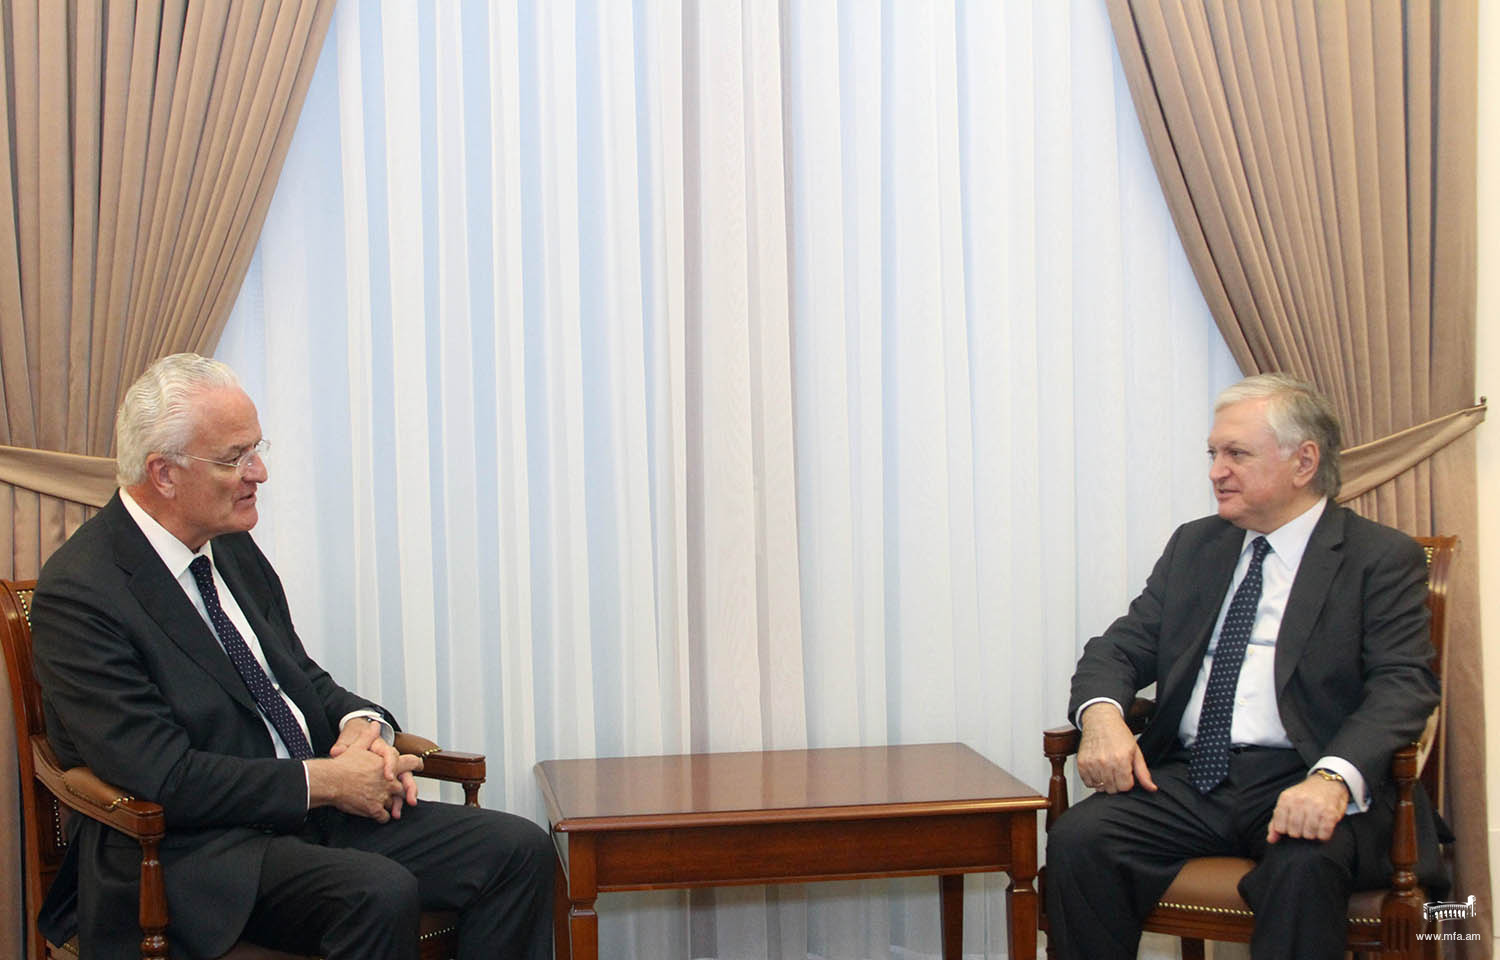 Foreign Minister of Armenia received the Head of the CoE Directorate General of Human Rights and Rule of Law